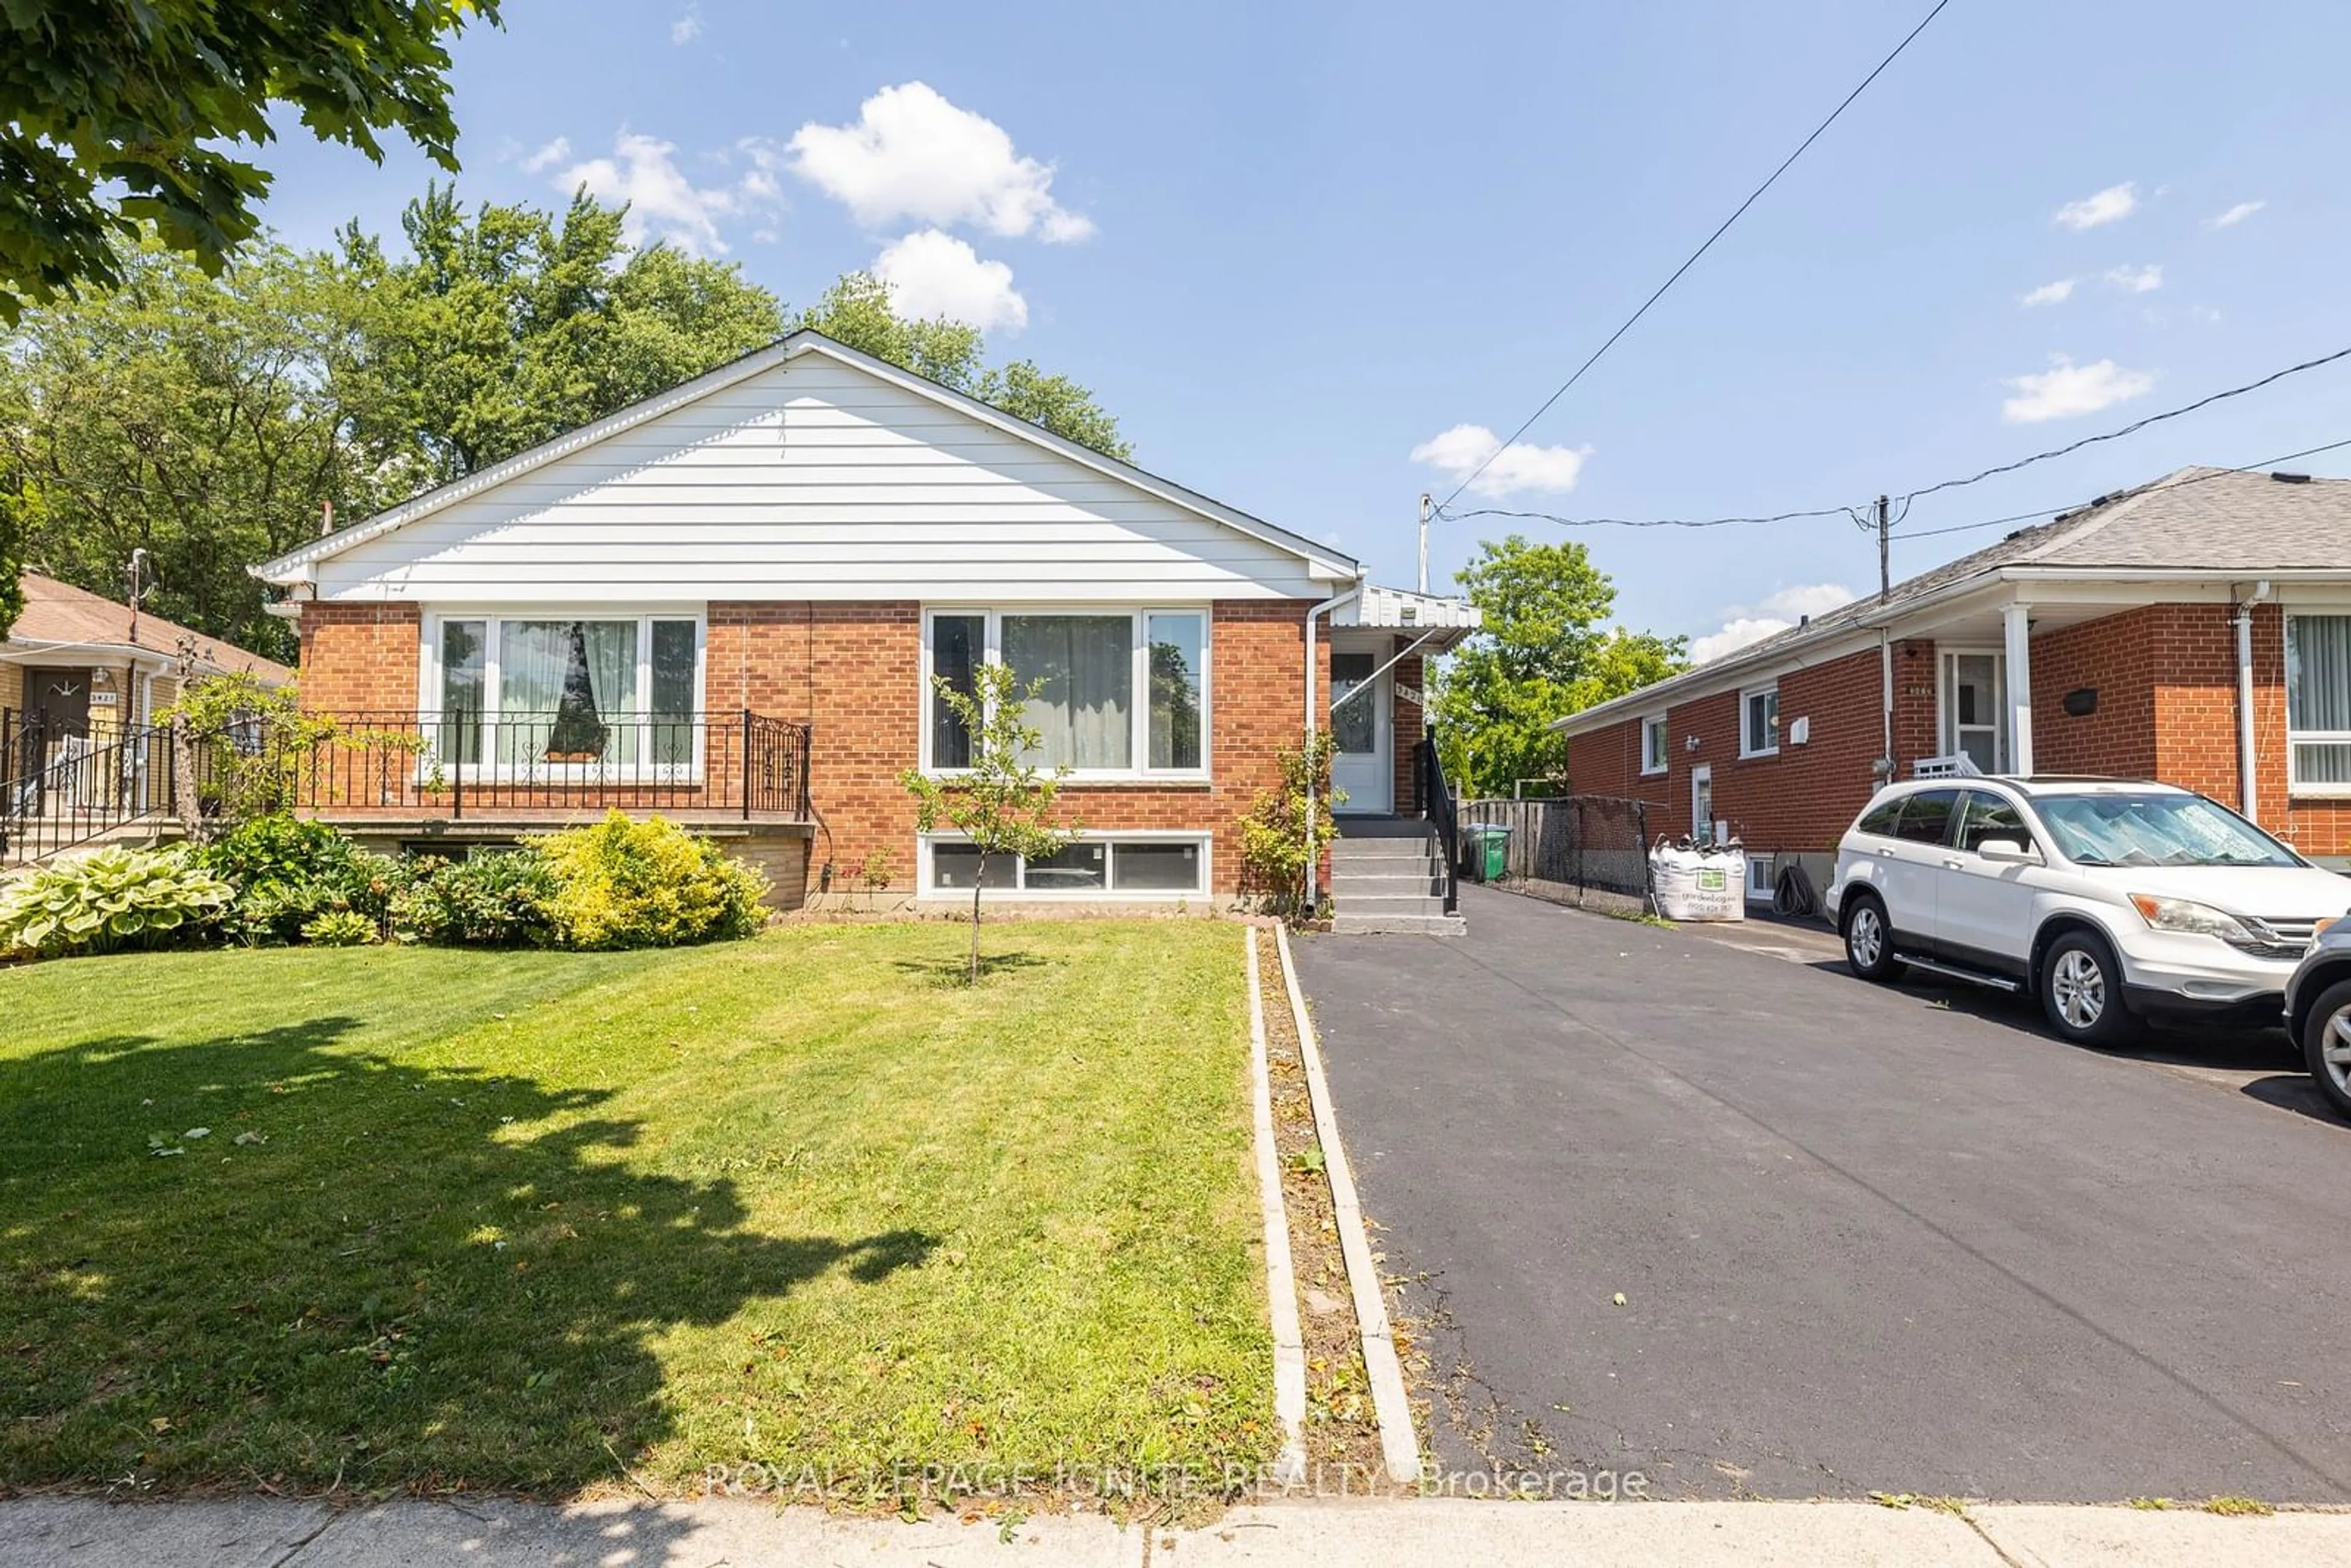 Frontside or backside of a home for 3421 Fellmore Dr, Mississauga Ontario L5C 2E1